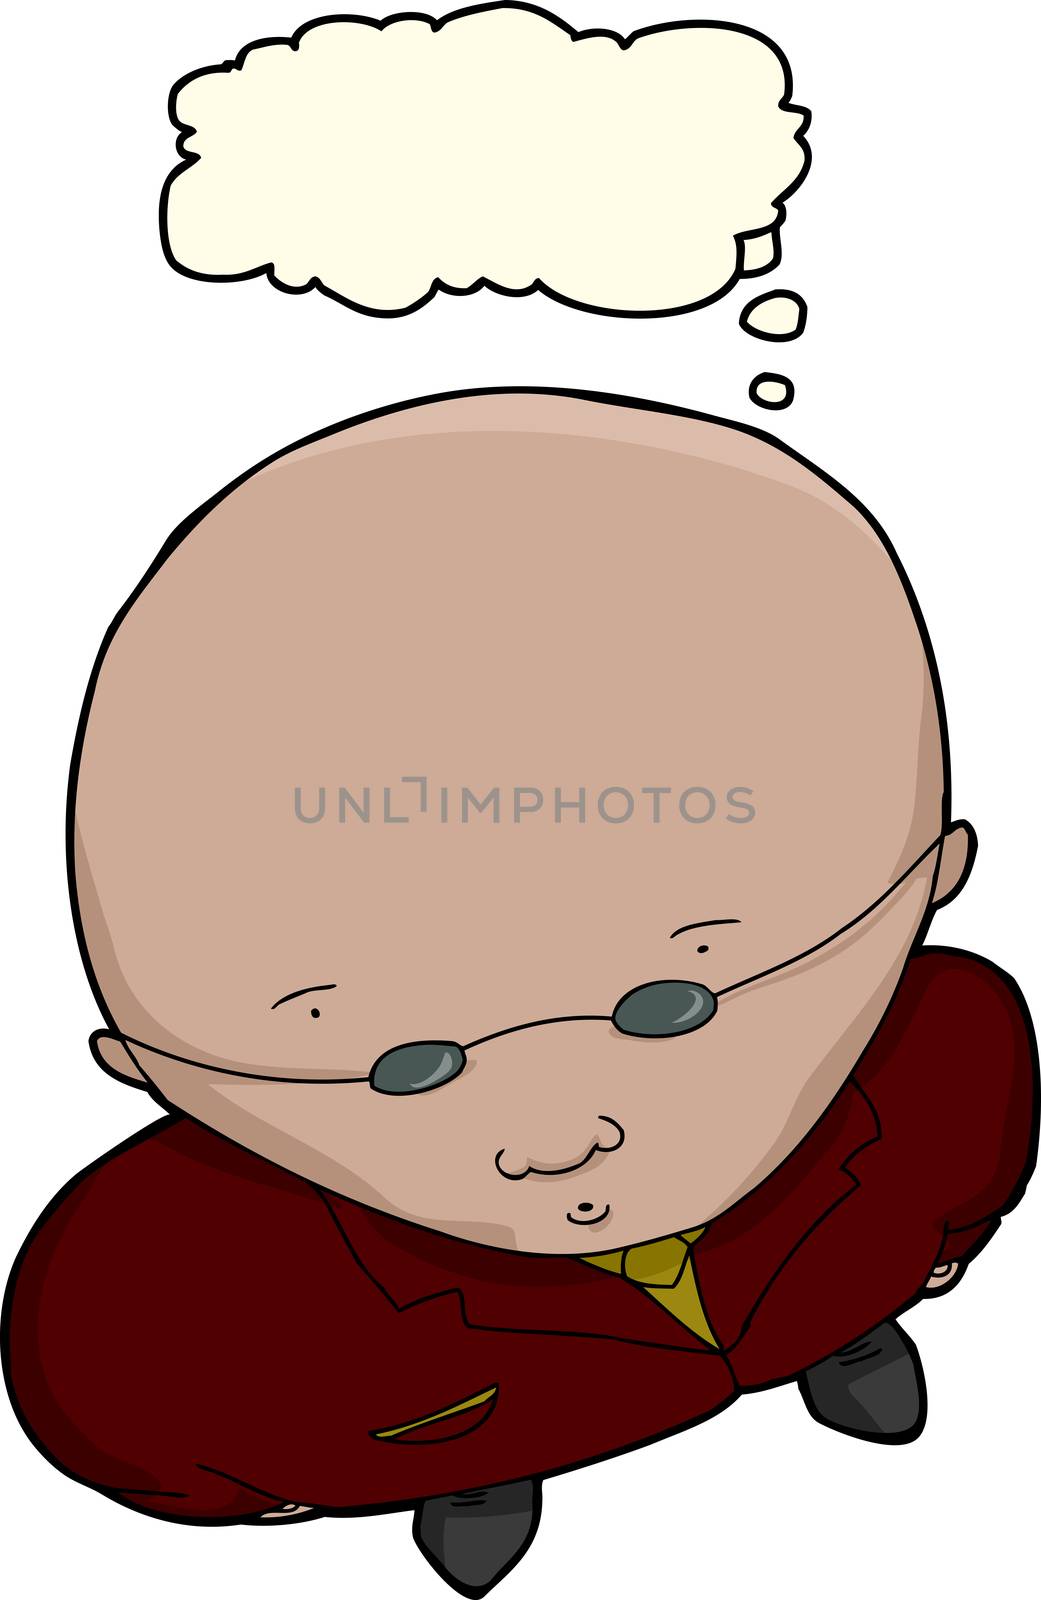 Bald whistling man in suit over isolated white background